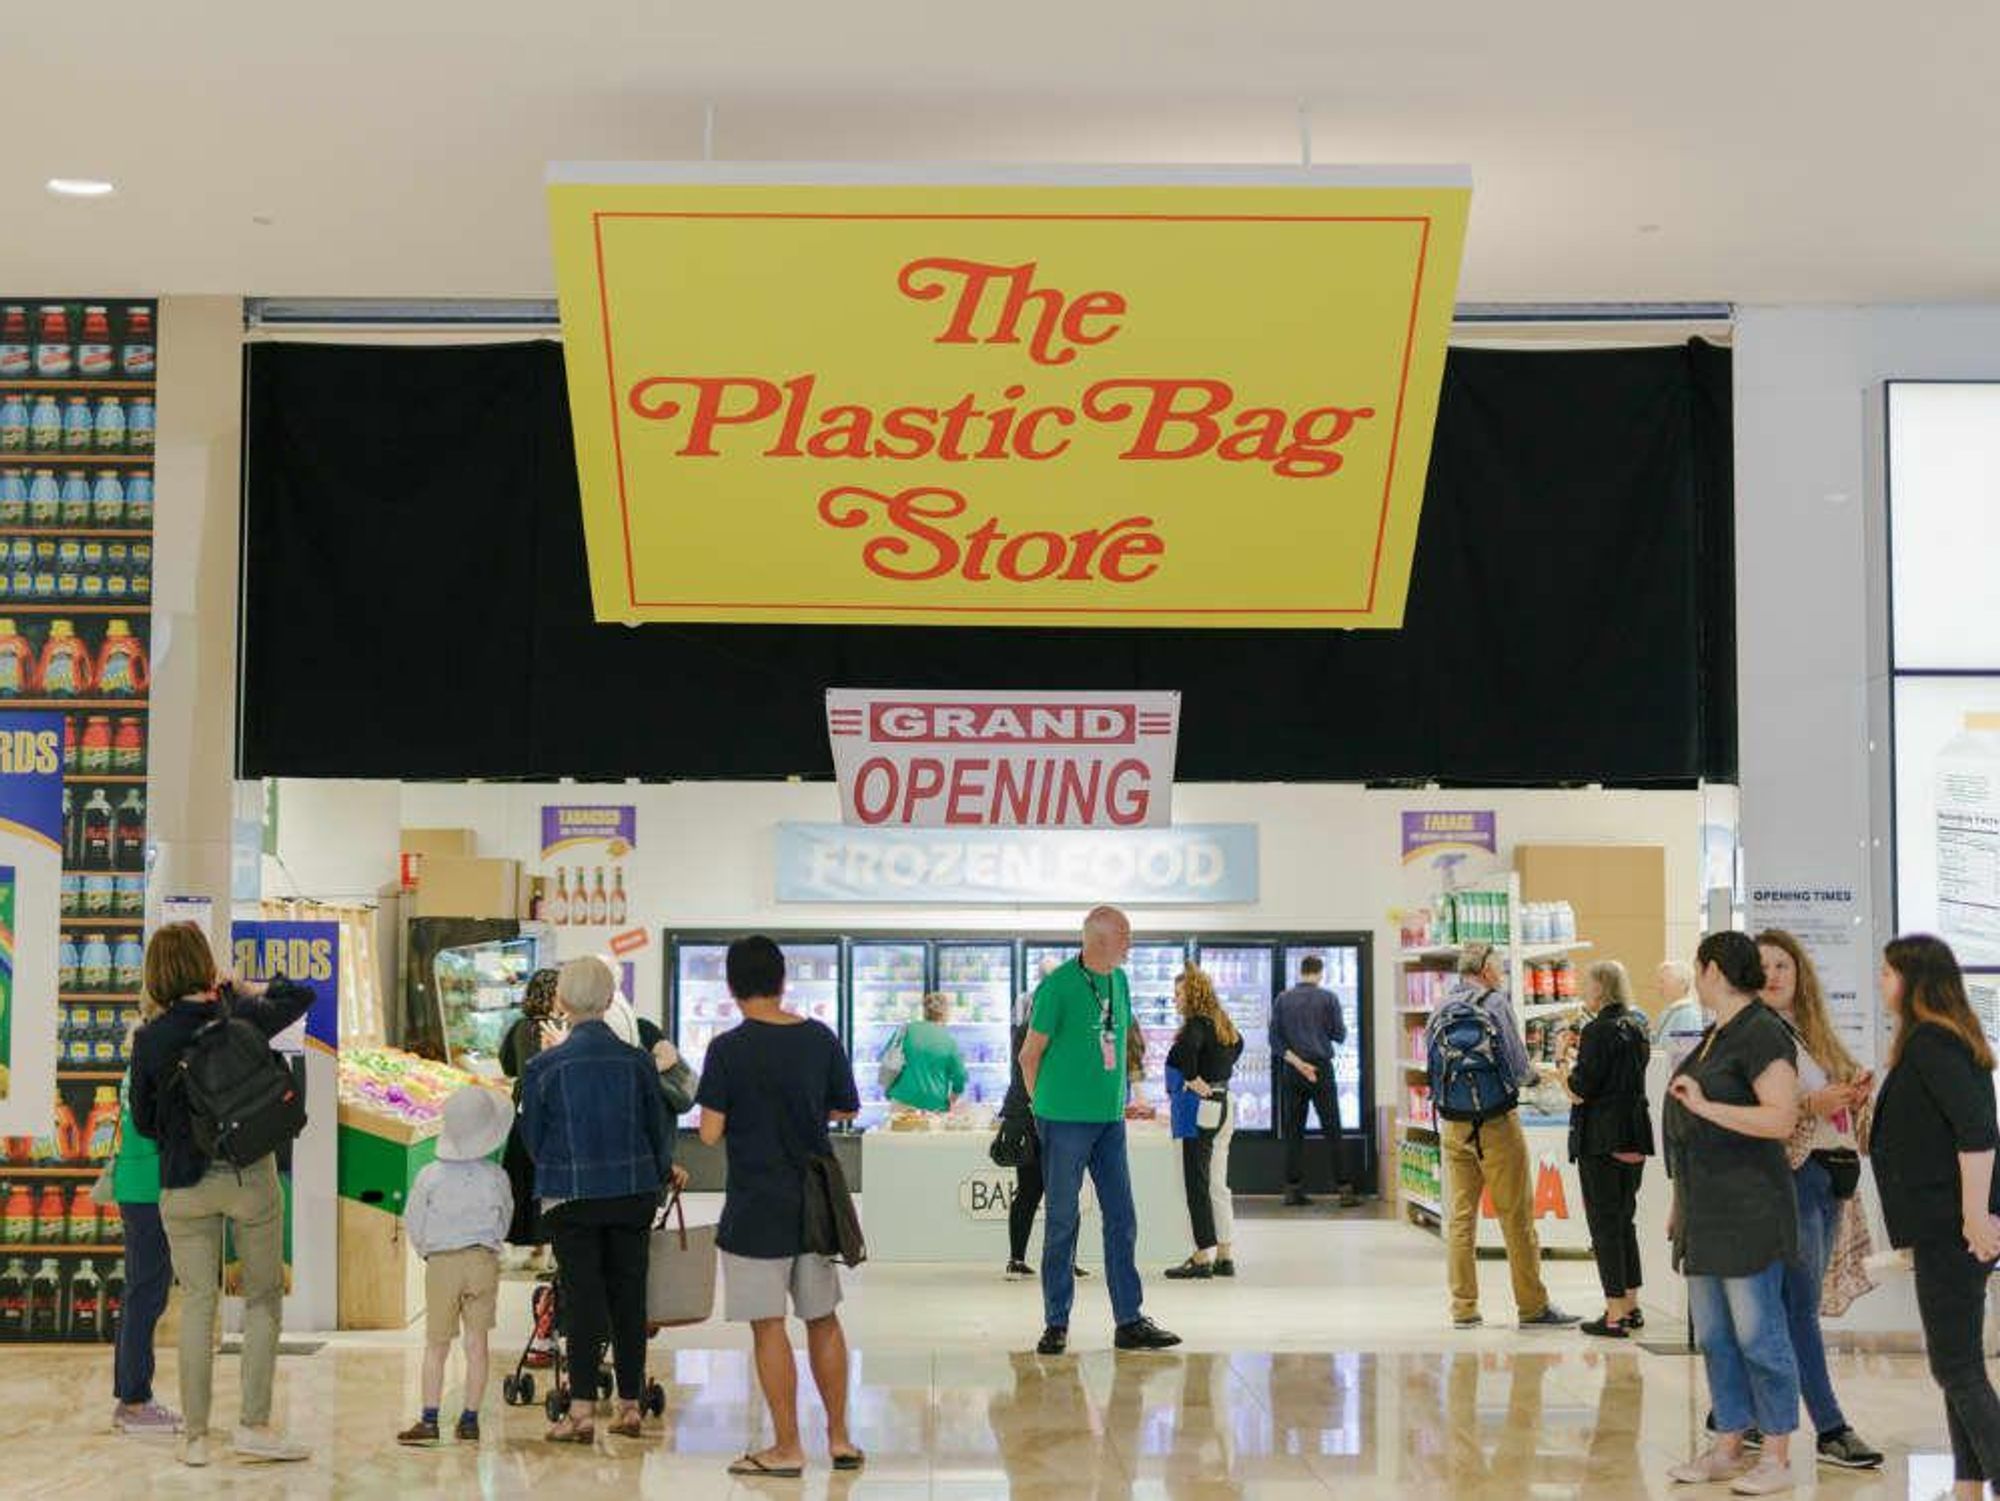 Explore the dynamic and immersive art experience, The Plastic Bag Store, this weekend.